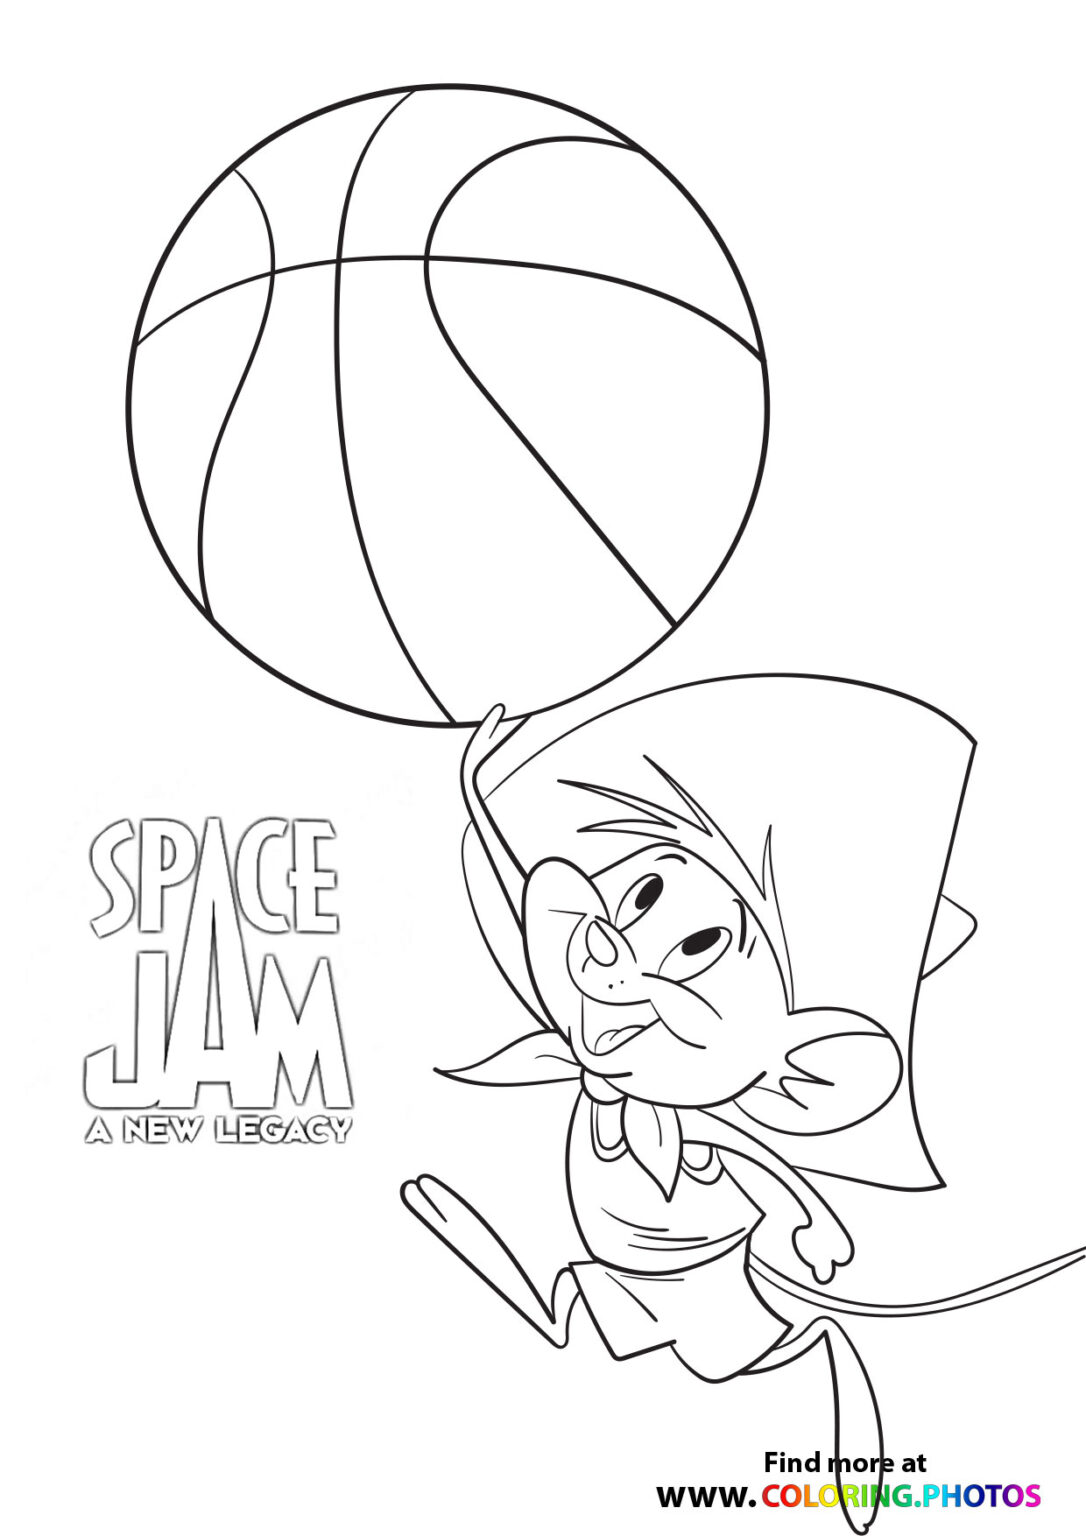 Space Jam 2: A new legacy - Coloring Pages for kids | Free coloring page